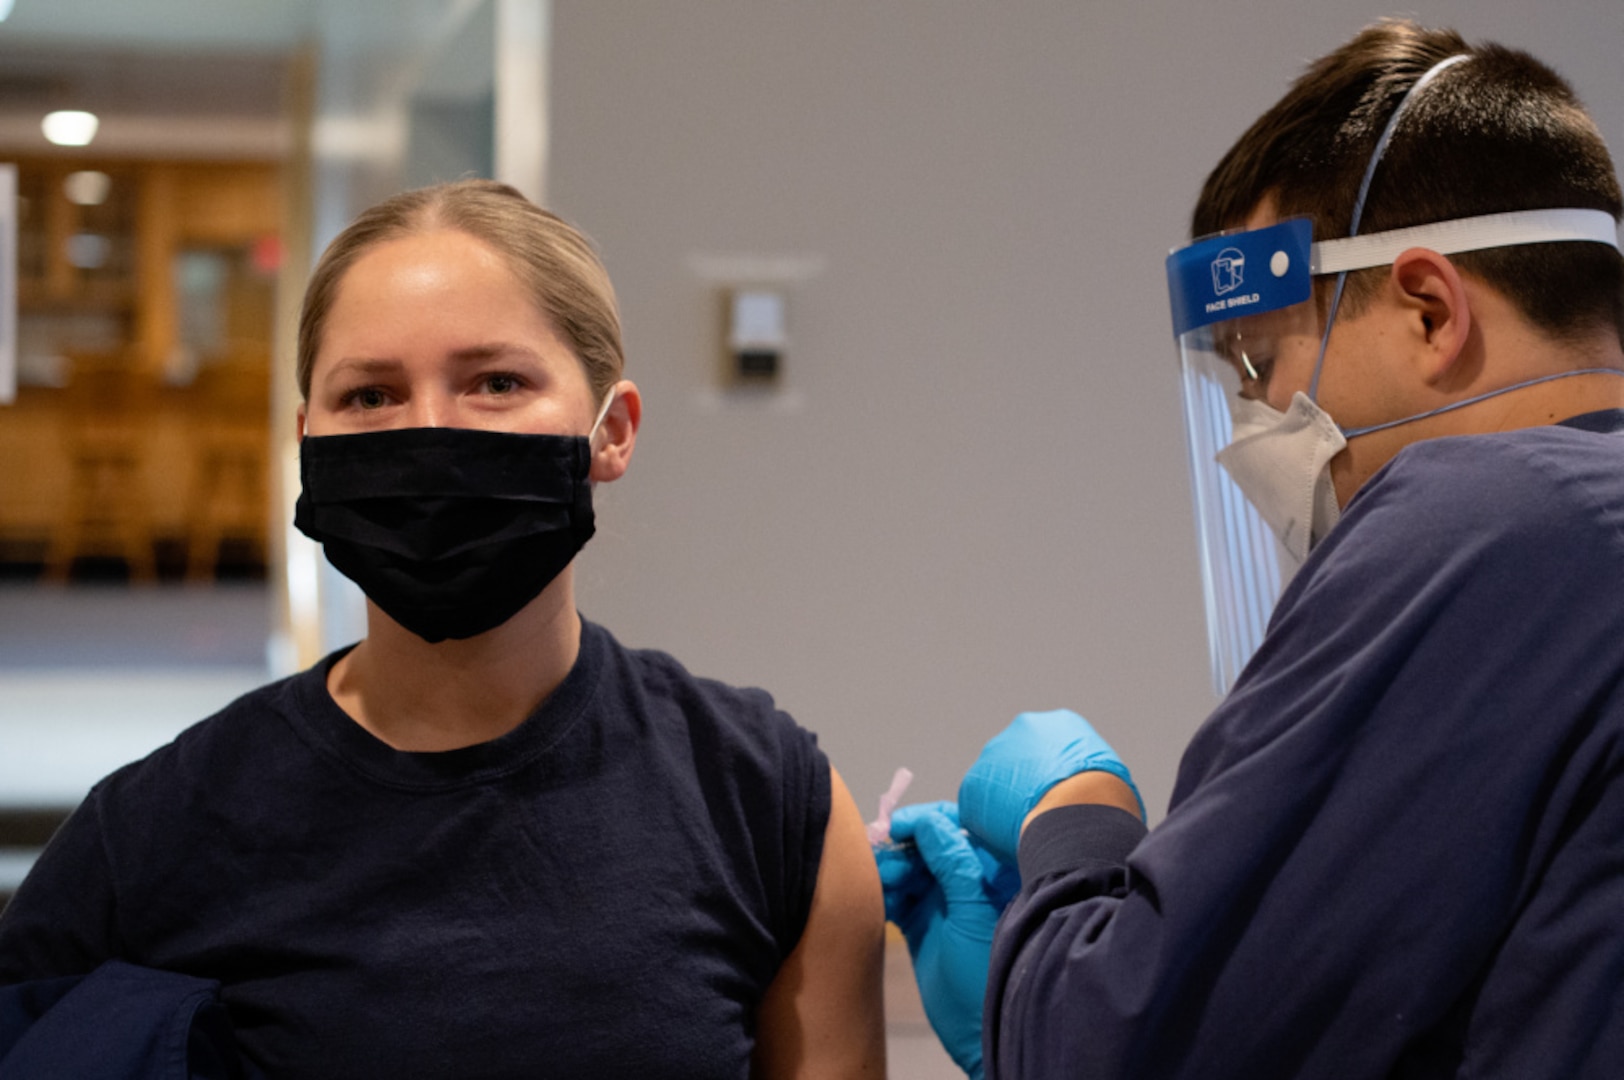 Coast Guard service members receive their initial dose of the Pfizer-BioNTech COVID-19 vaccine at U.S. Coast Guard Training Center Cape May, N.J., Jan. 8, 2021.